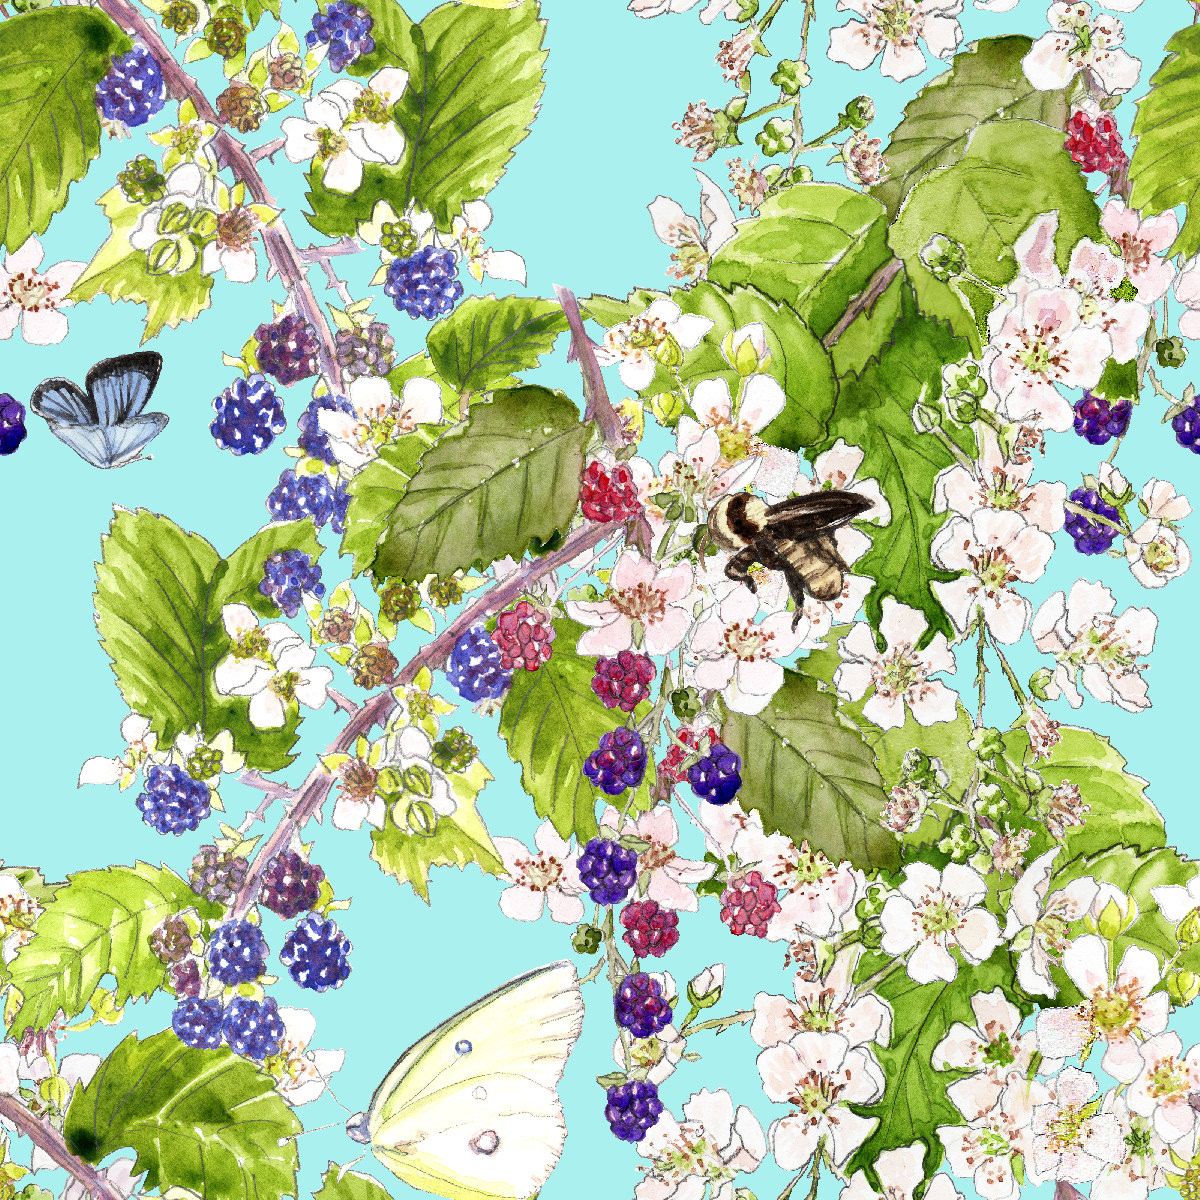 A watercolor illustration of blackberry vines and assorted butterflies and bees on an aqua ground